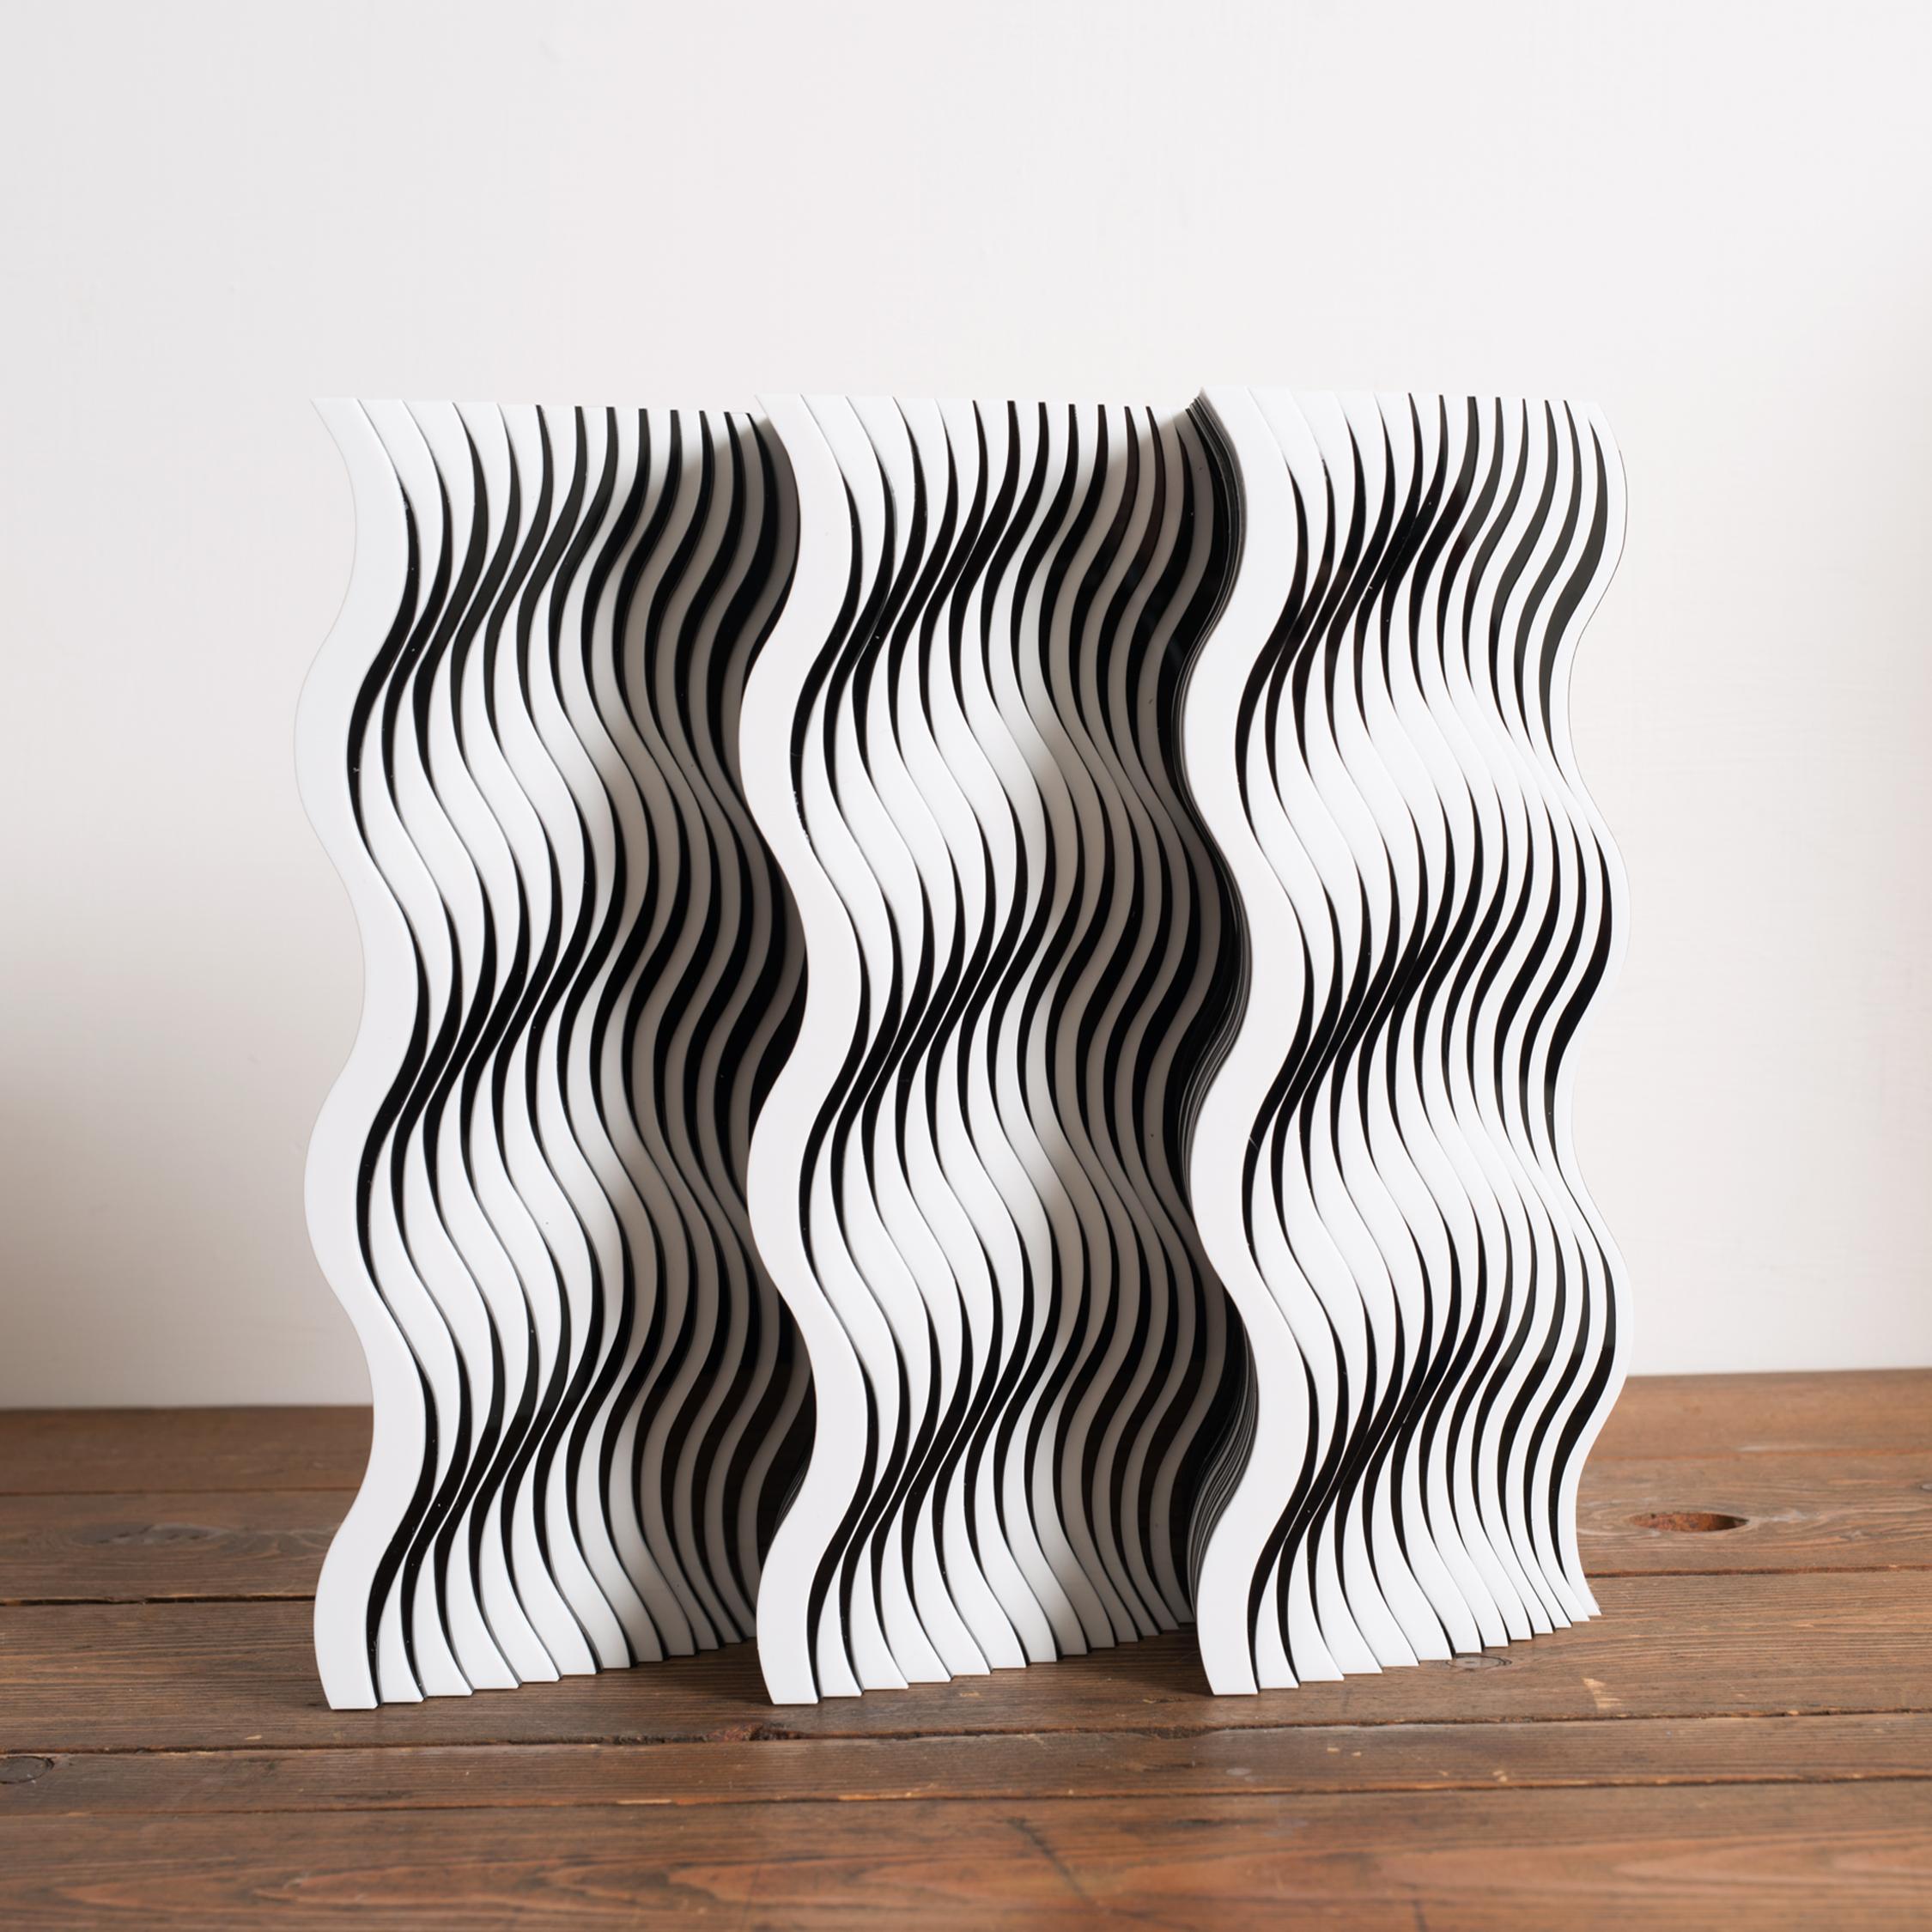 Giò Schiano  Abstract Sculpture - Let forever be Black and White Sculpture